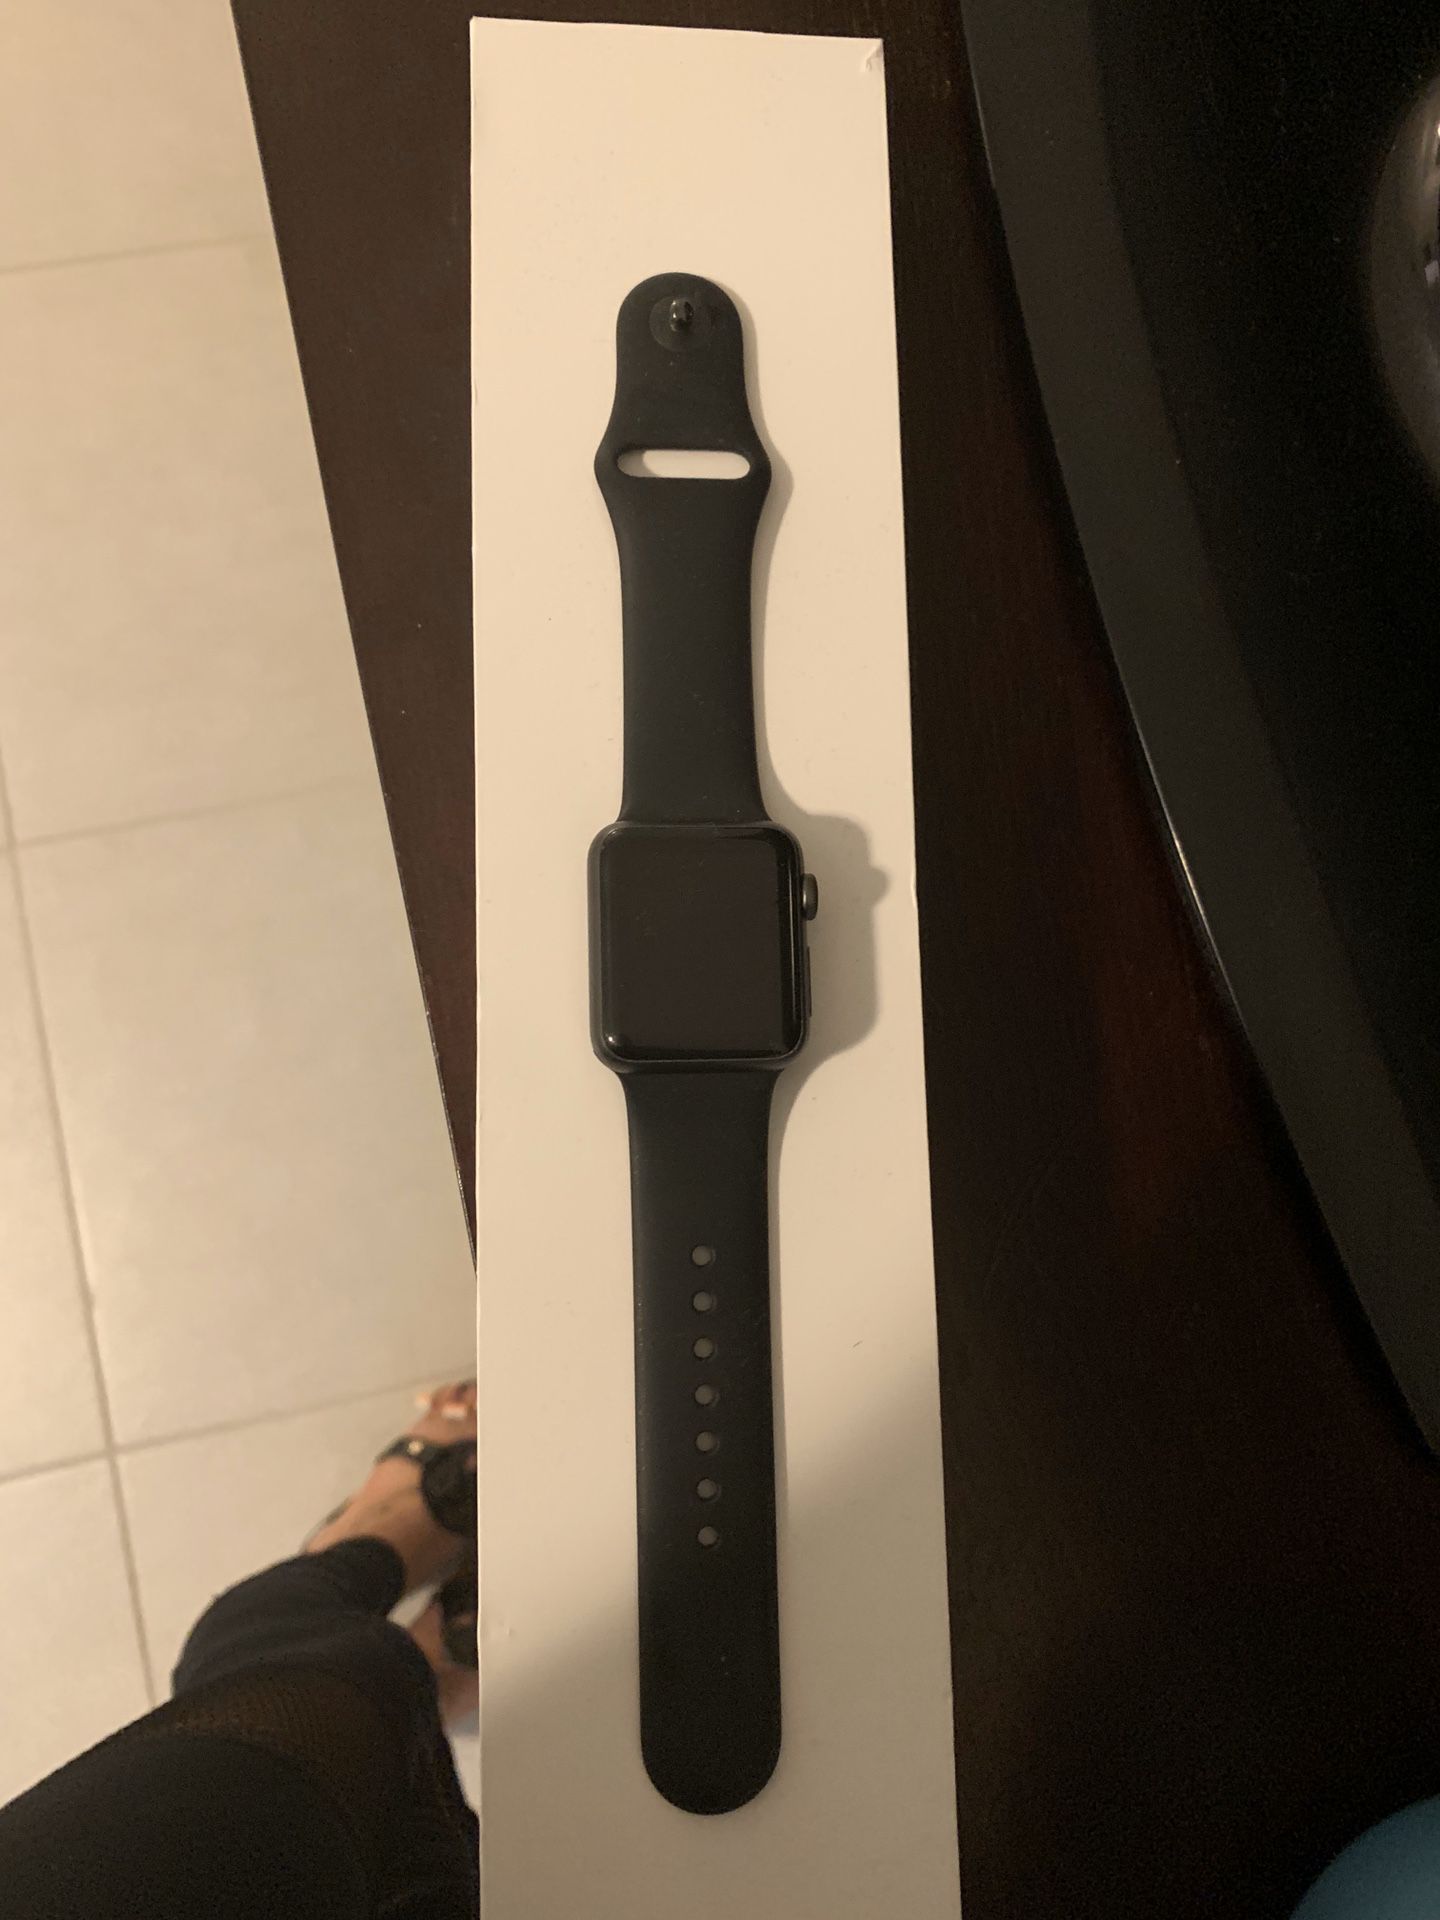 Series 1 Apple Watch like new with box